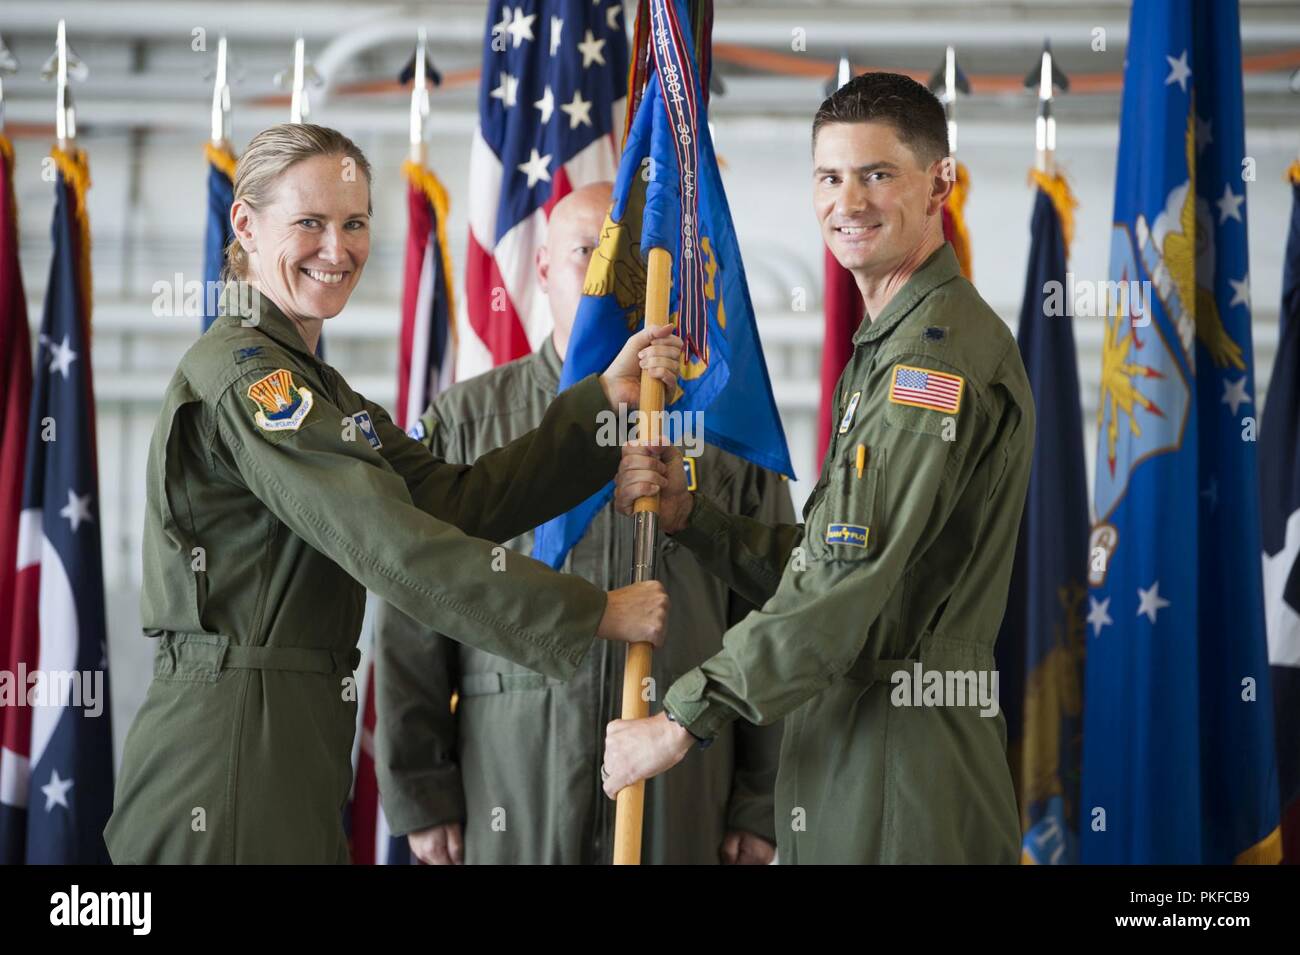 U.S. Air Force Col. Lisa Nemeth, 6th Operations Group commander, passes the 310th Airlift Squadron (AS) guidon to Lt. Col. Daniel Lindley during a change of command ceremony at MacDill Air Force Base, Fla., Aug. 3, 2018. Lt. Col. Carol Mitchell relinquished command to Lindley, who previously served as the assistant director of operations at the 310th AS. Stock Photo